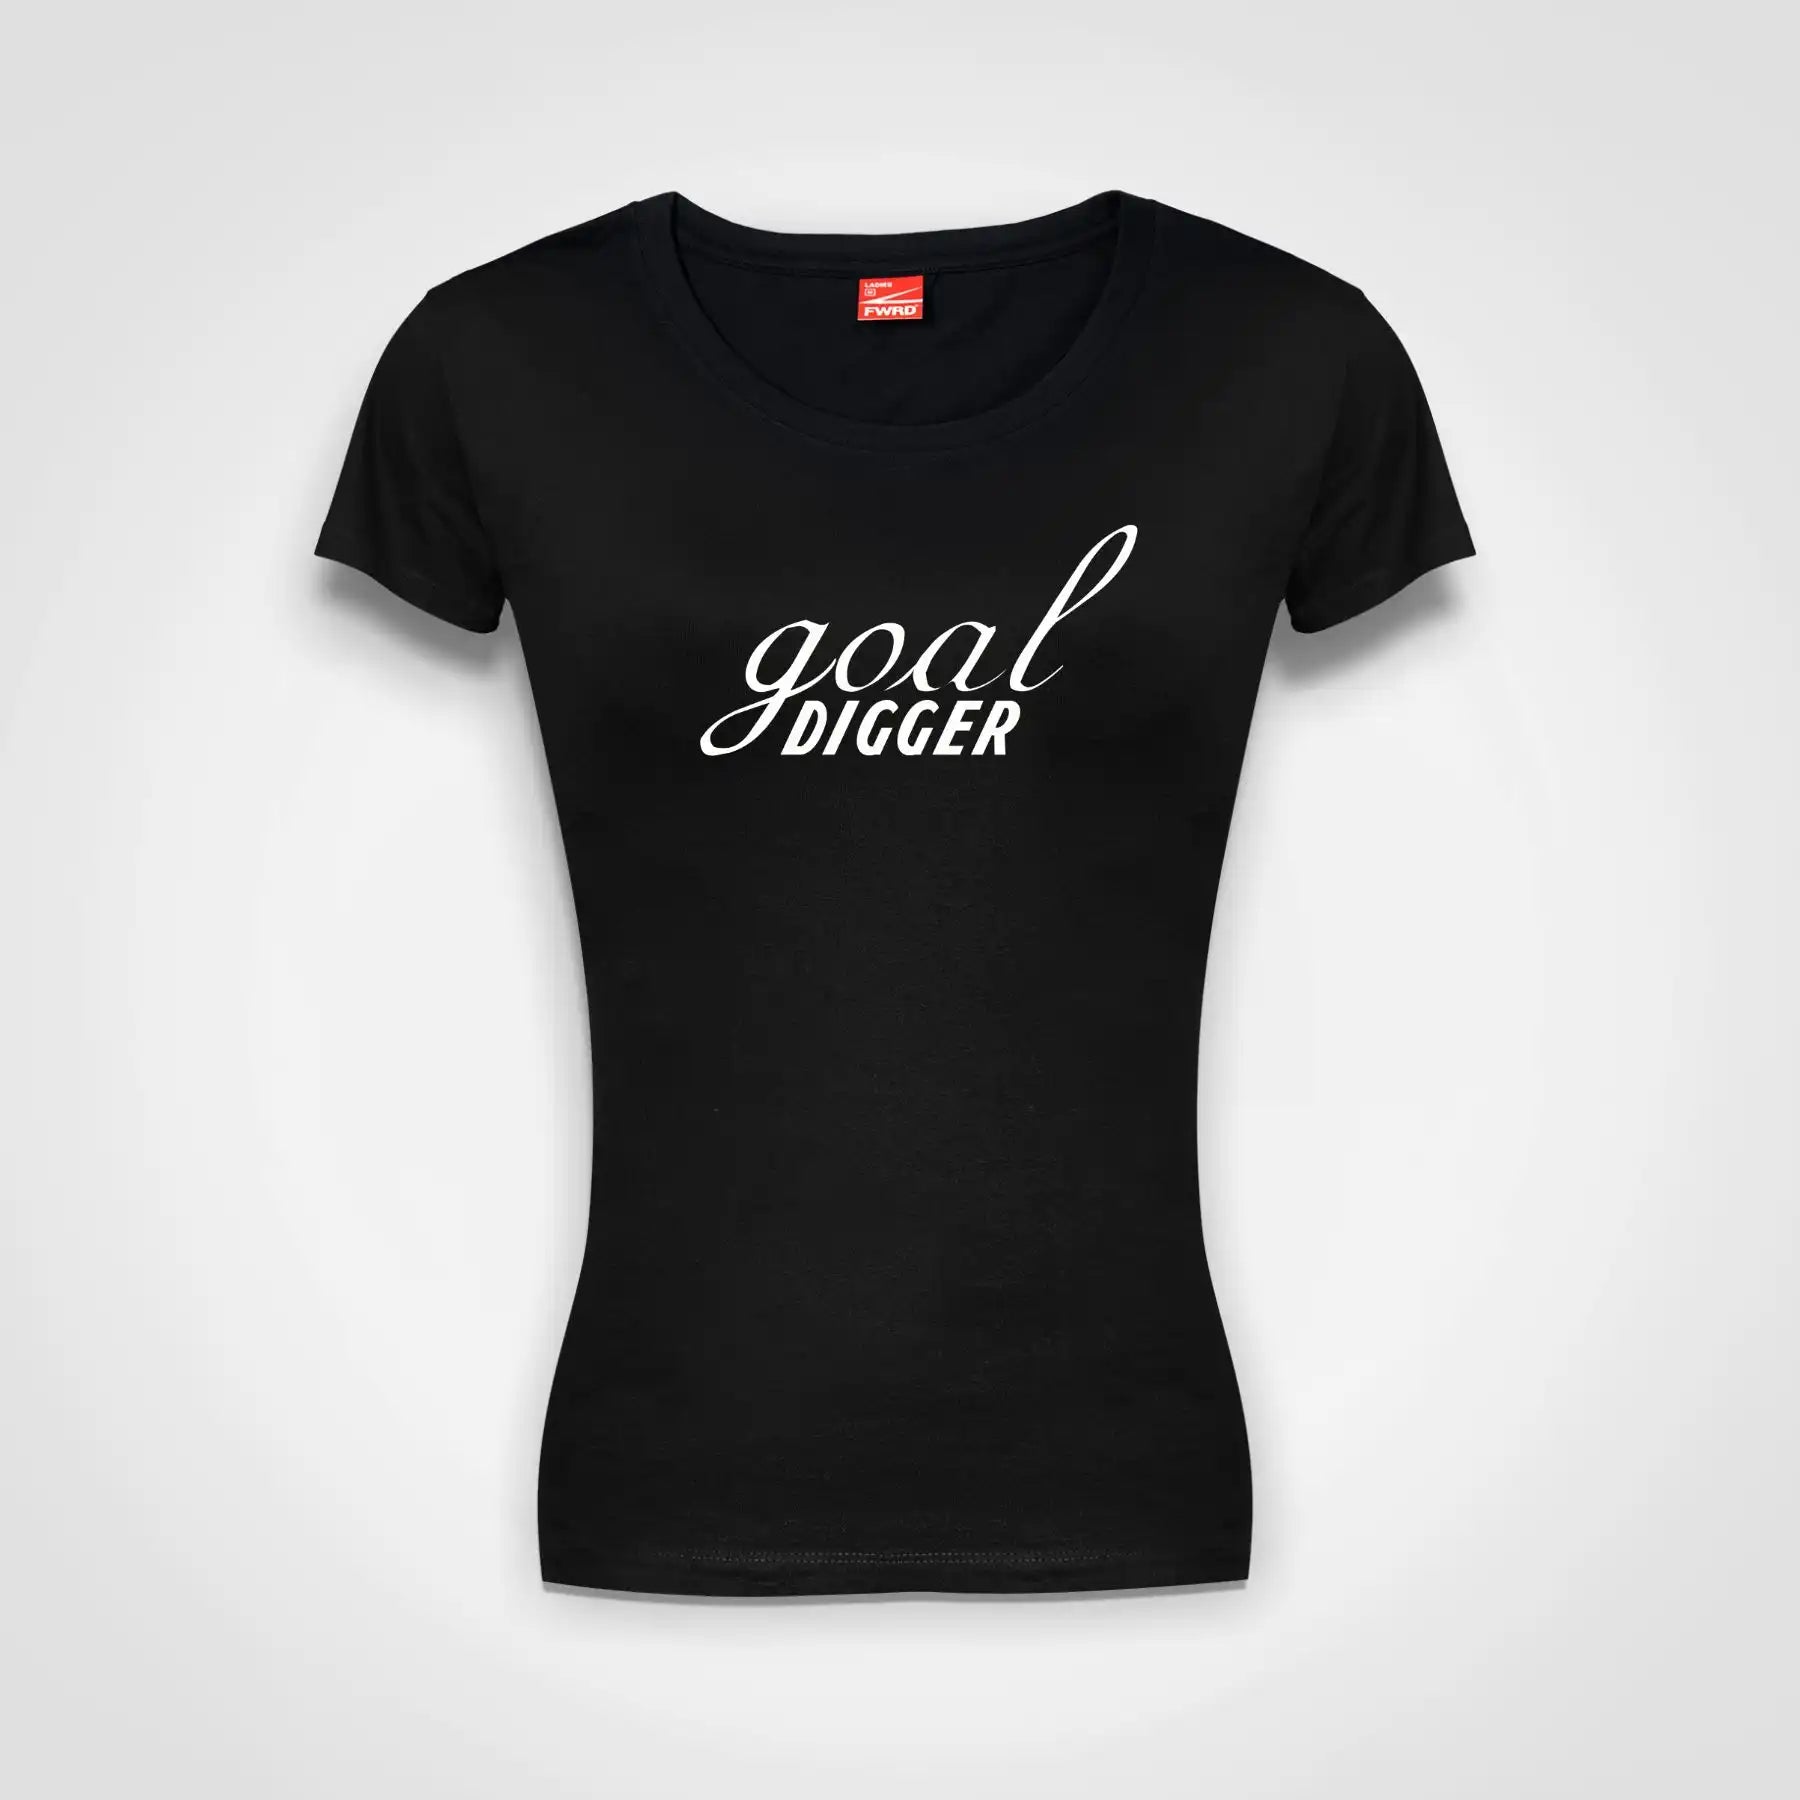 Goal Digger Ladies Fitted T-Shirt Black IZZIT APPAREL